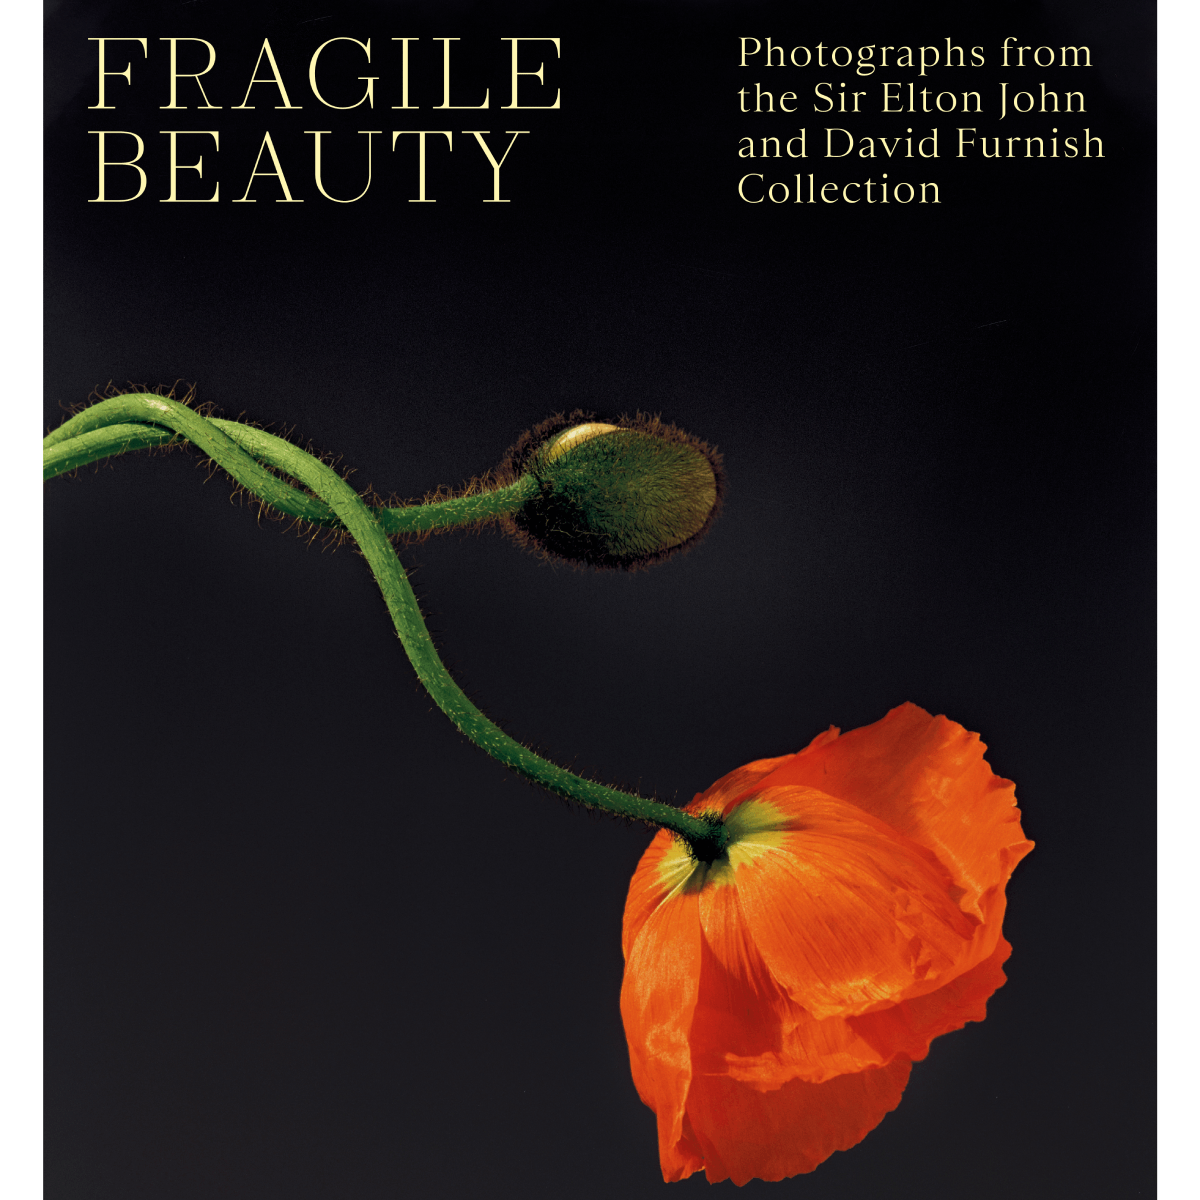 Fragile Beauty: Photographs from the Sir Elton John and David Furnish Collection exhibition book - hardback